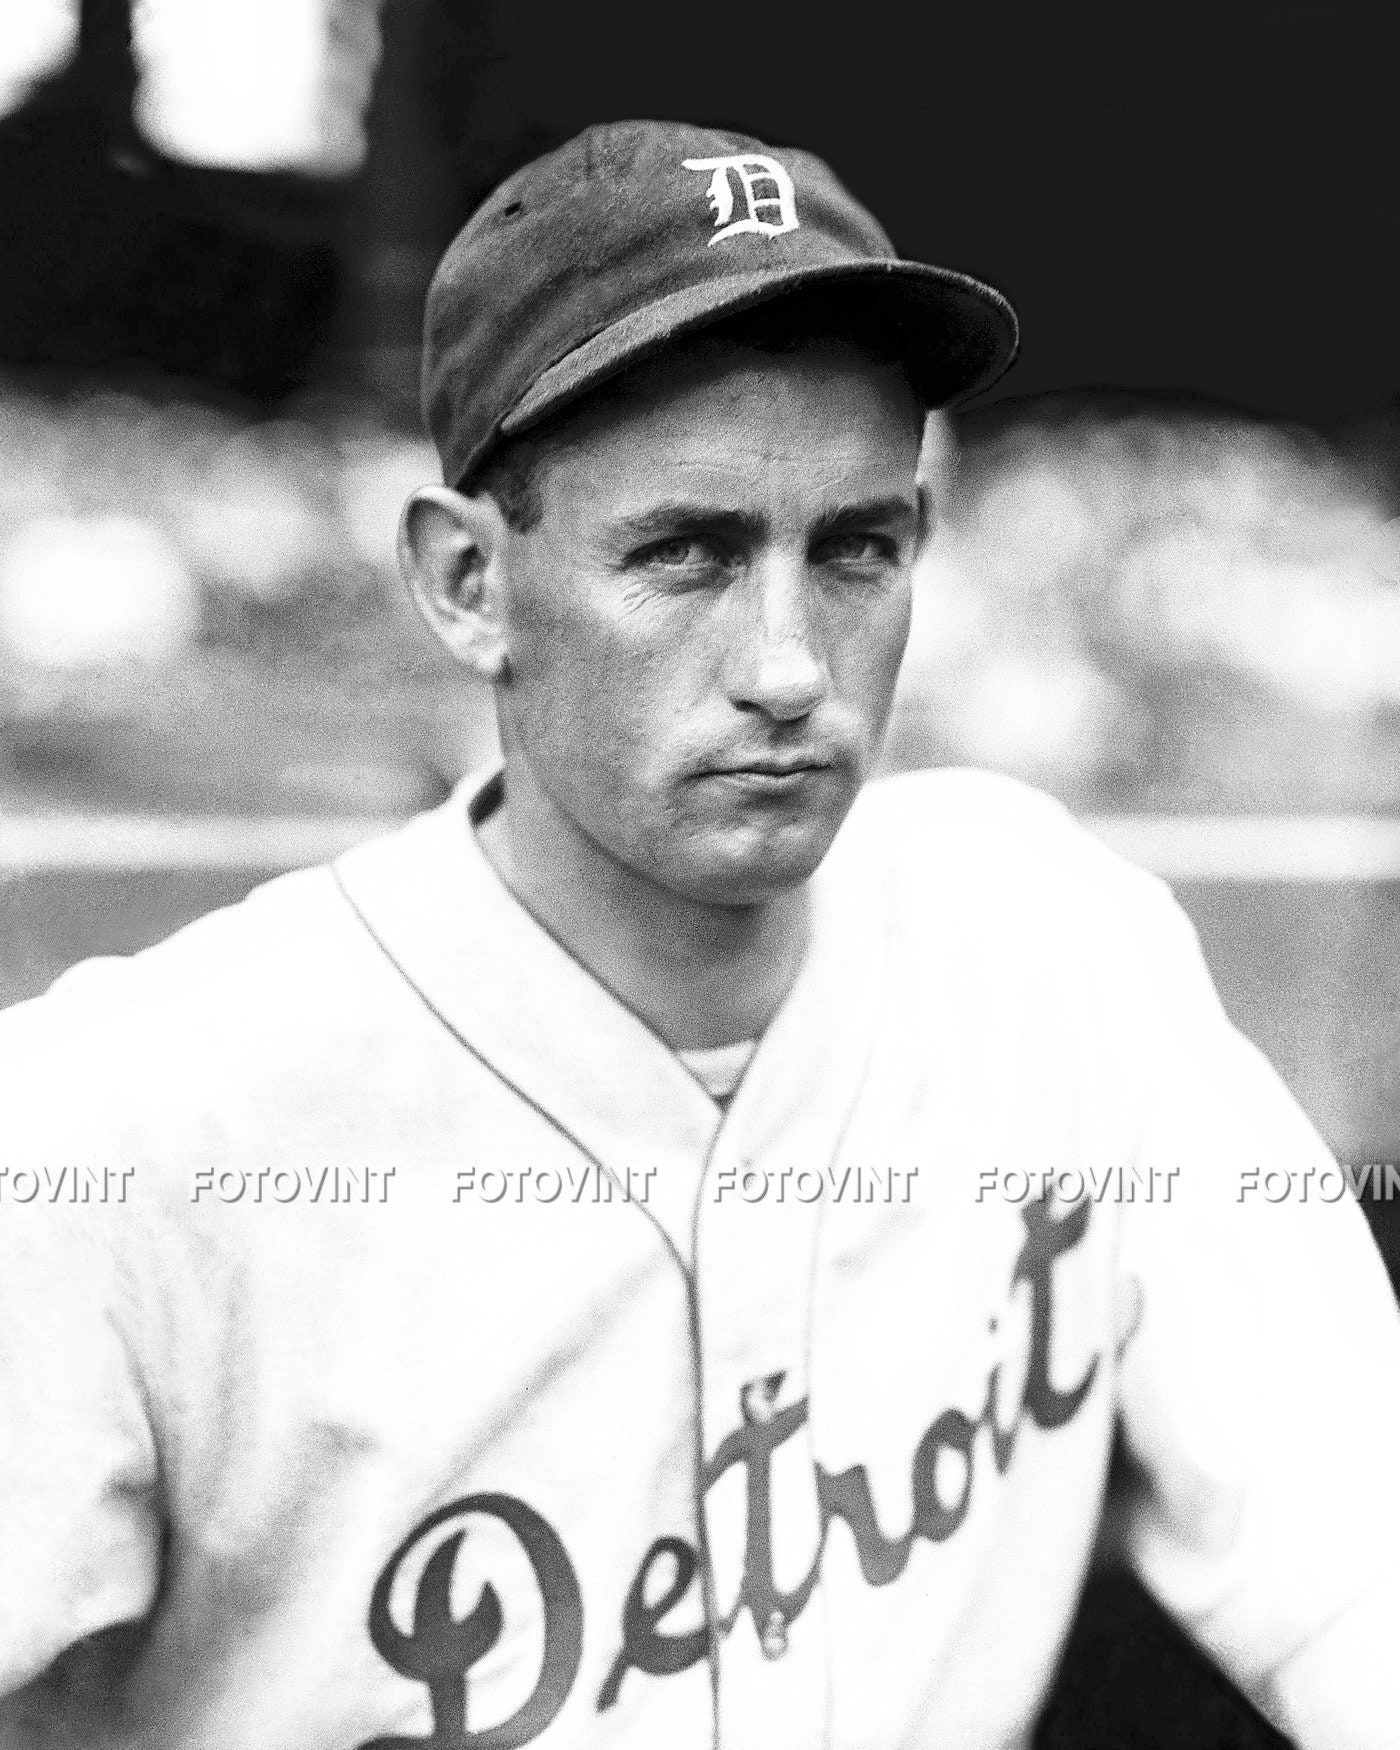 CHARLIE GEHRINGER Photo Picture 1934 DETROIT Tigers Baseball 